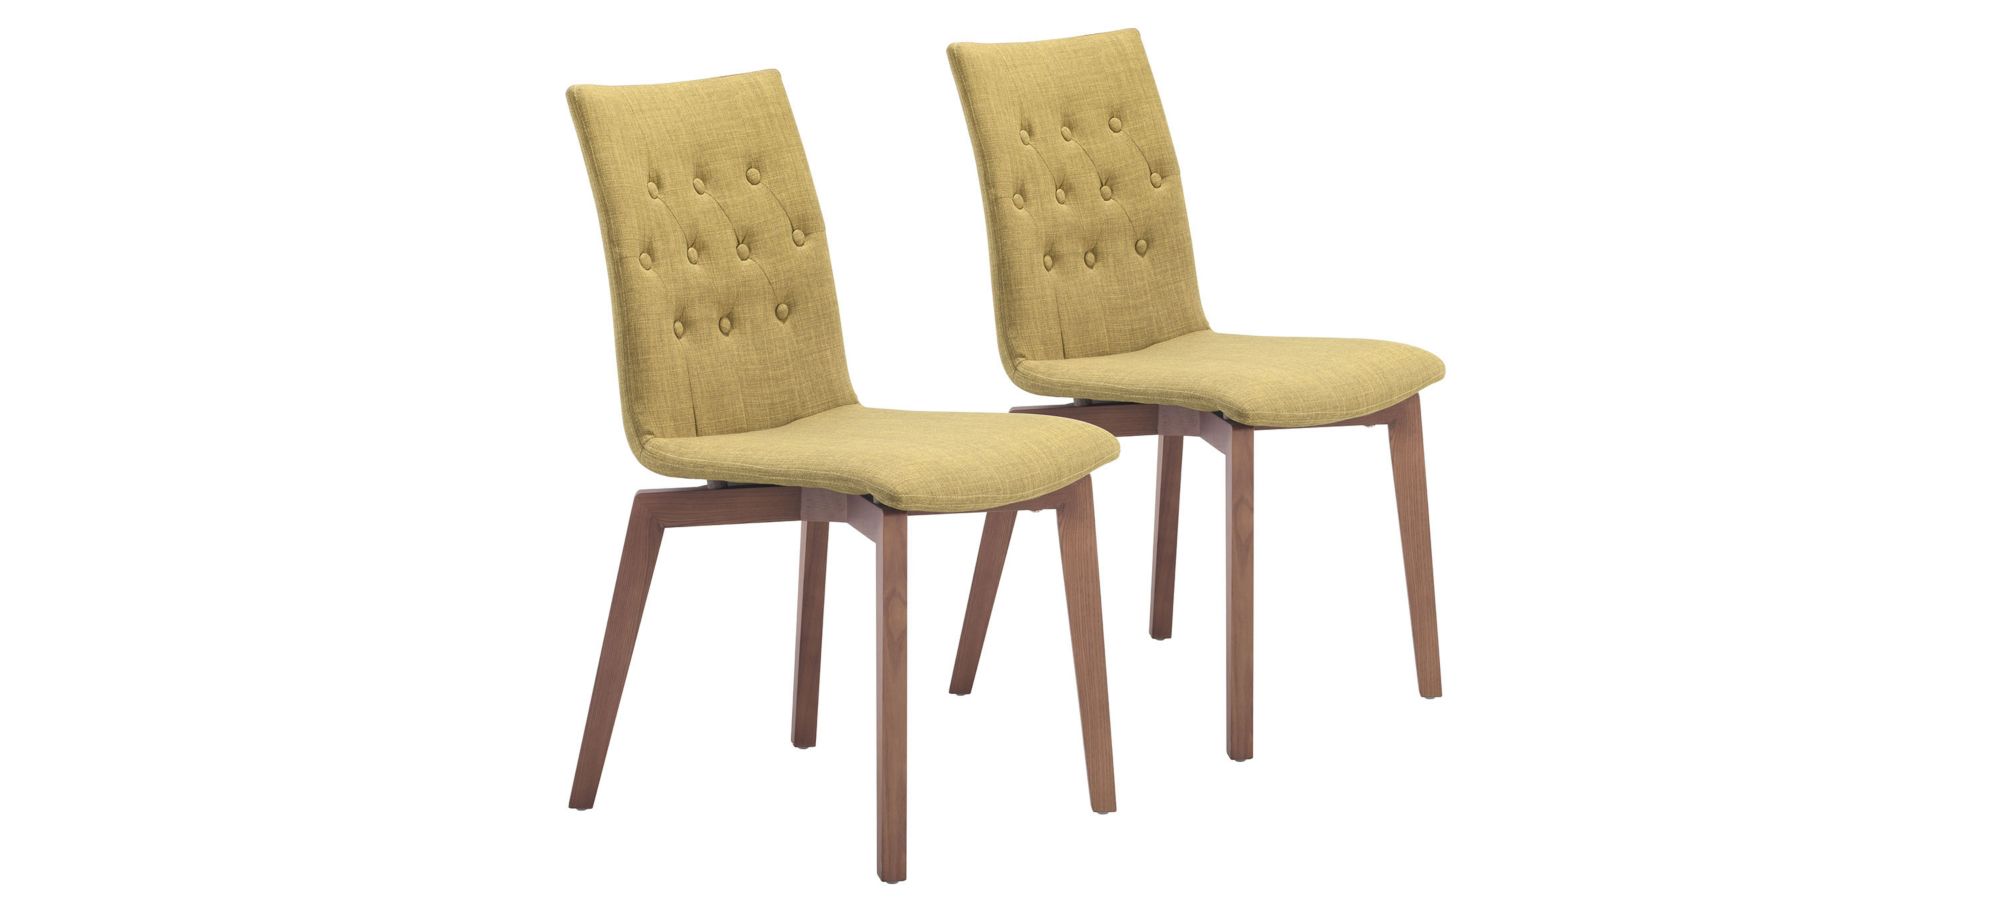 Orebro Dining Chair: Set of 2 in Pea Green, Brown by Zuo Modern